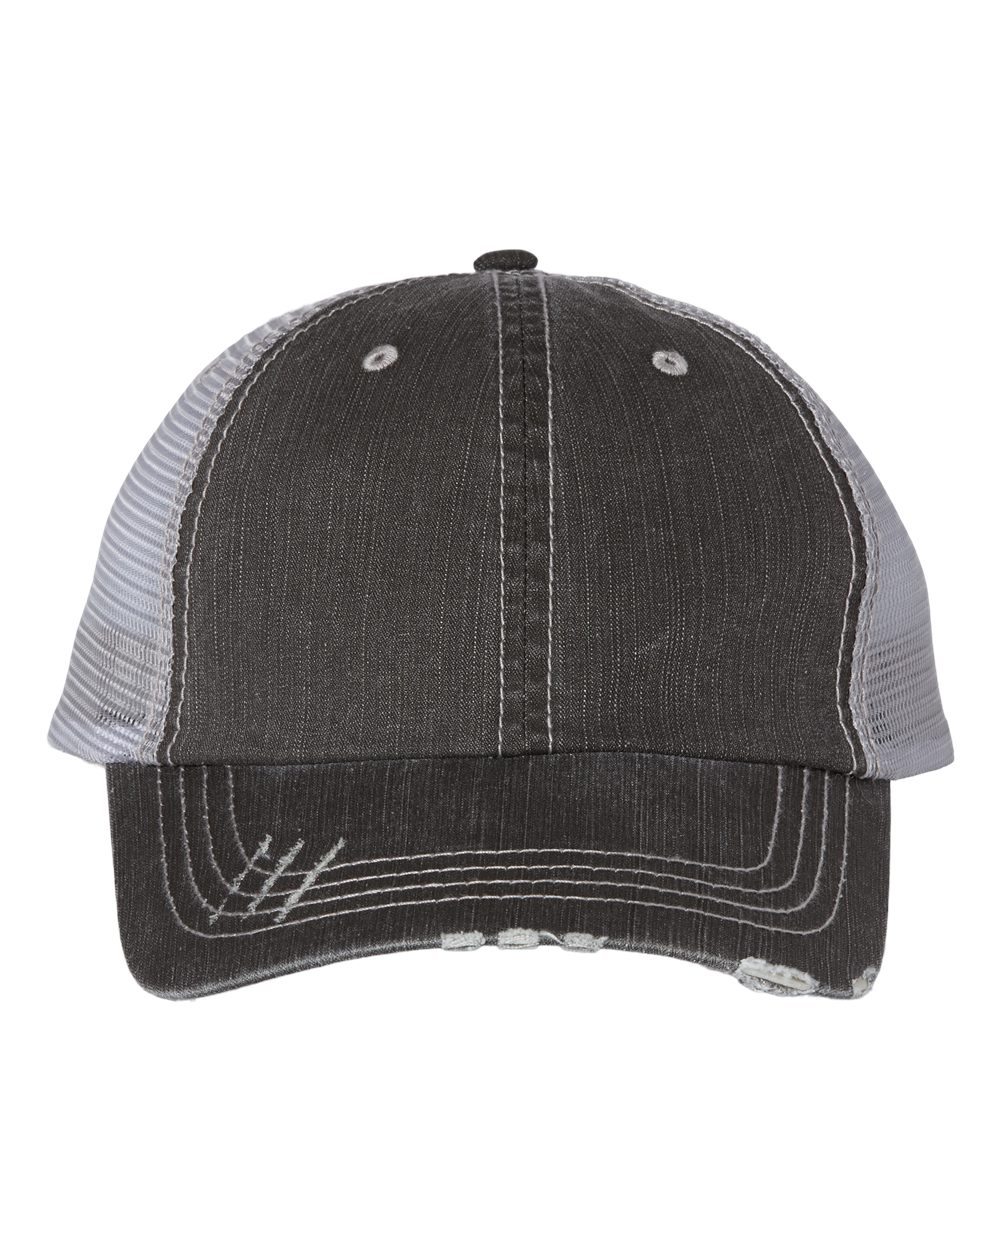 Just a Small Town Girl Distressed Patch Hat